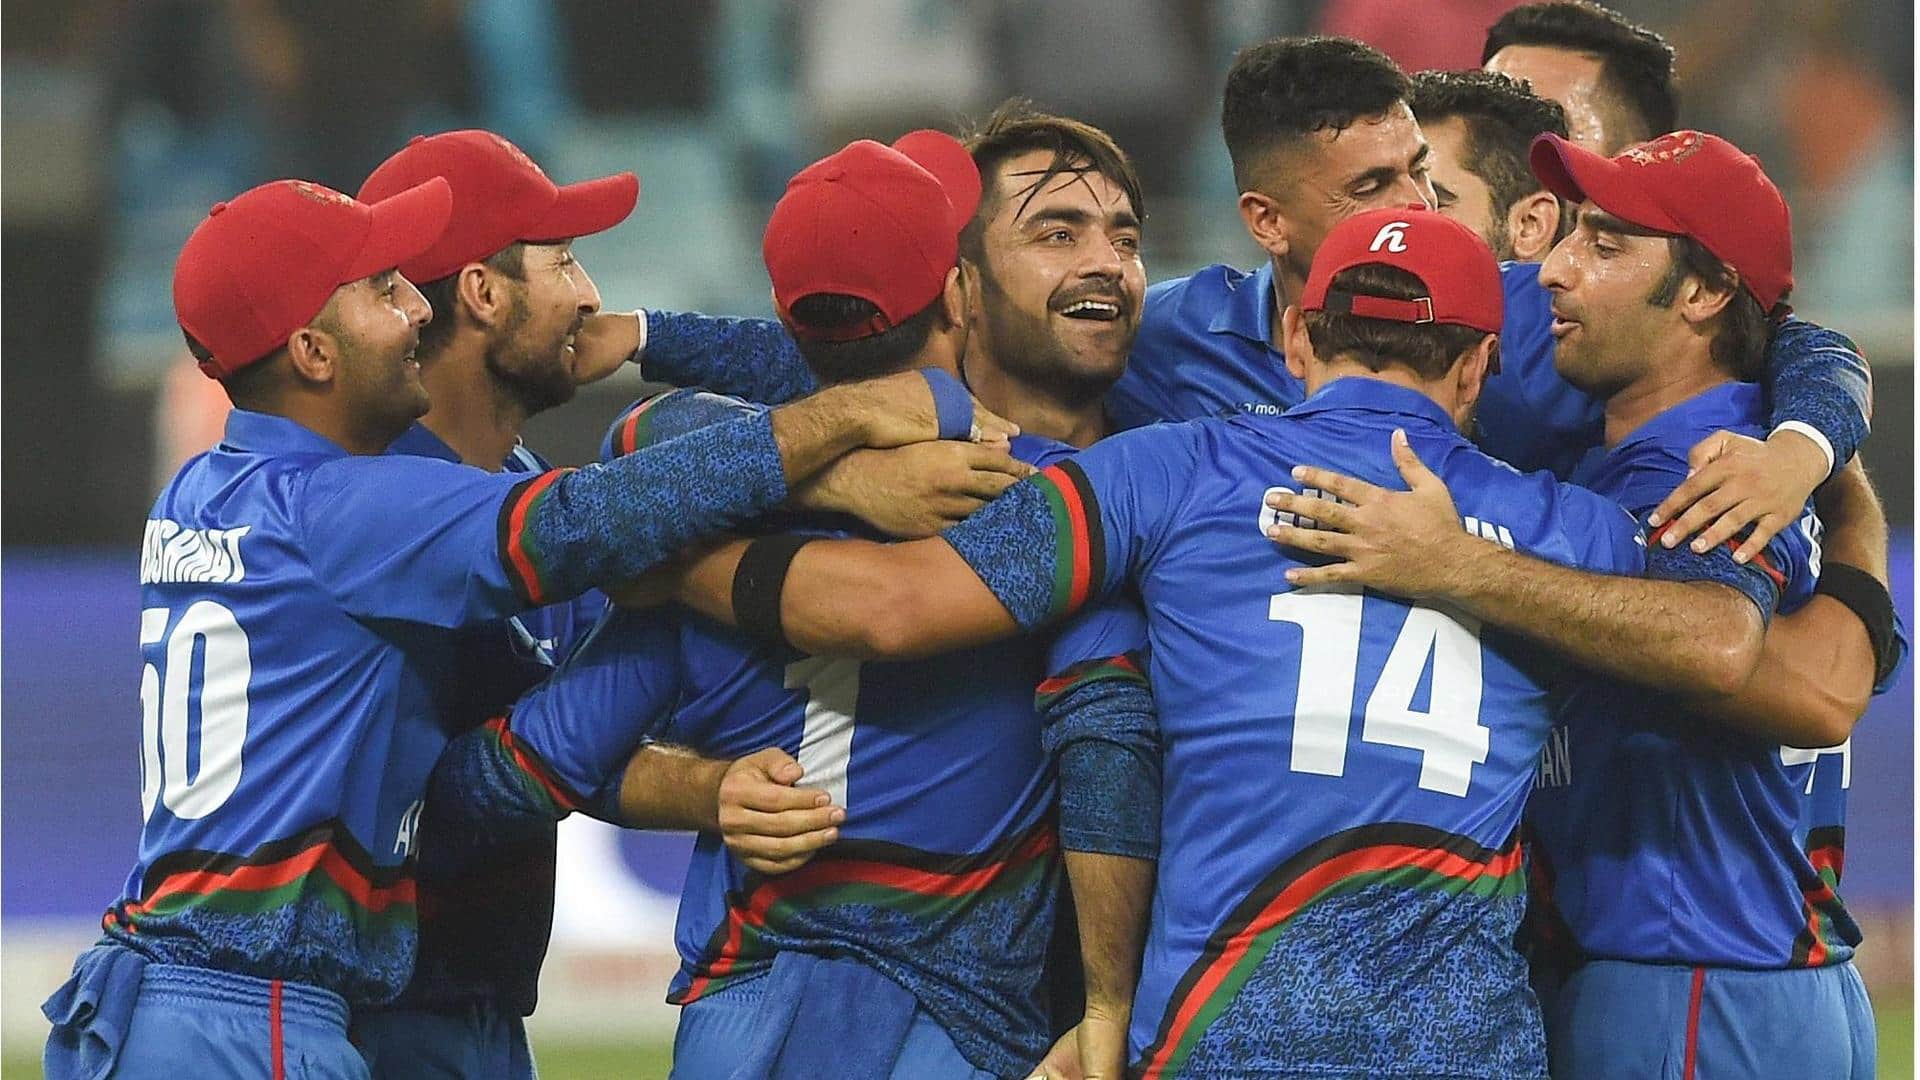 1st ODI Fullstrength Afghanistan out to script history against Pakistan